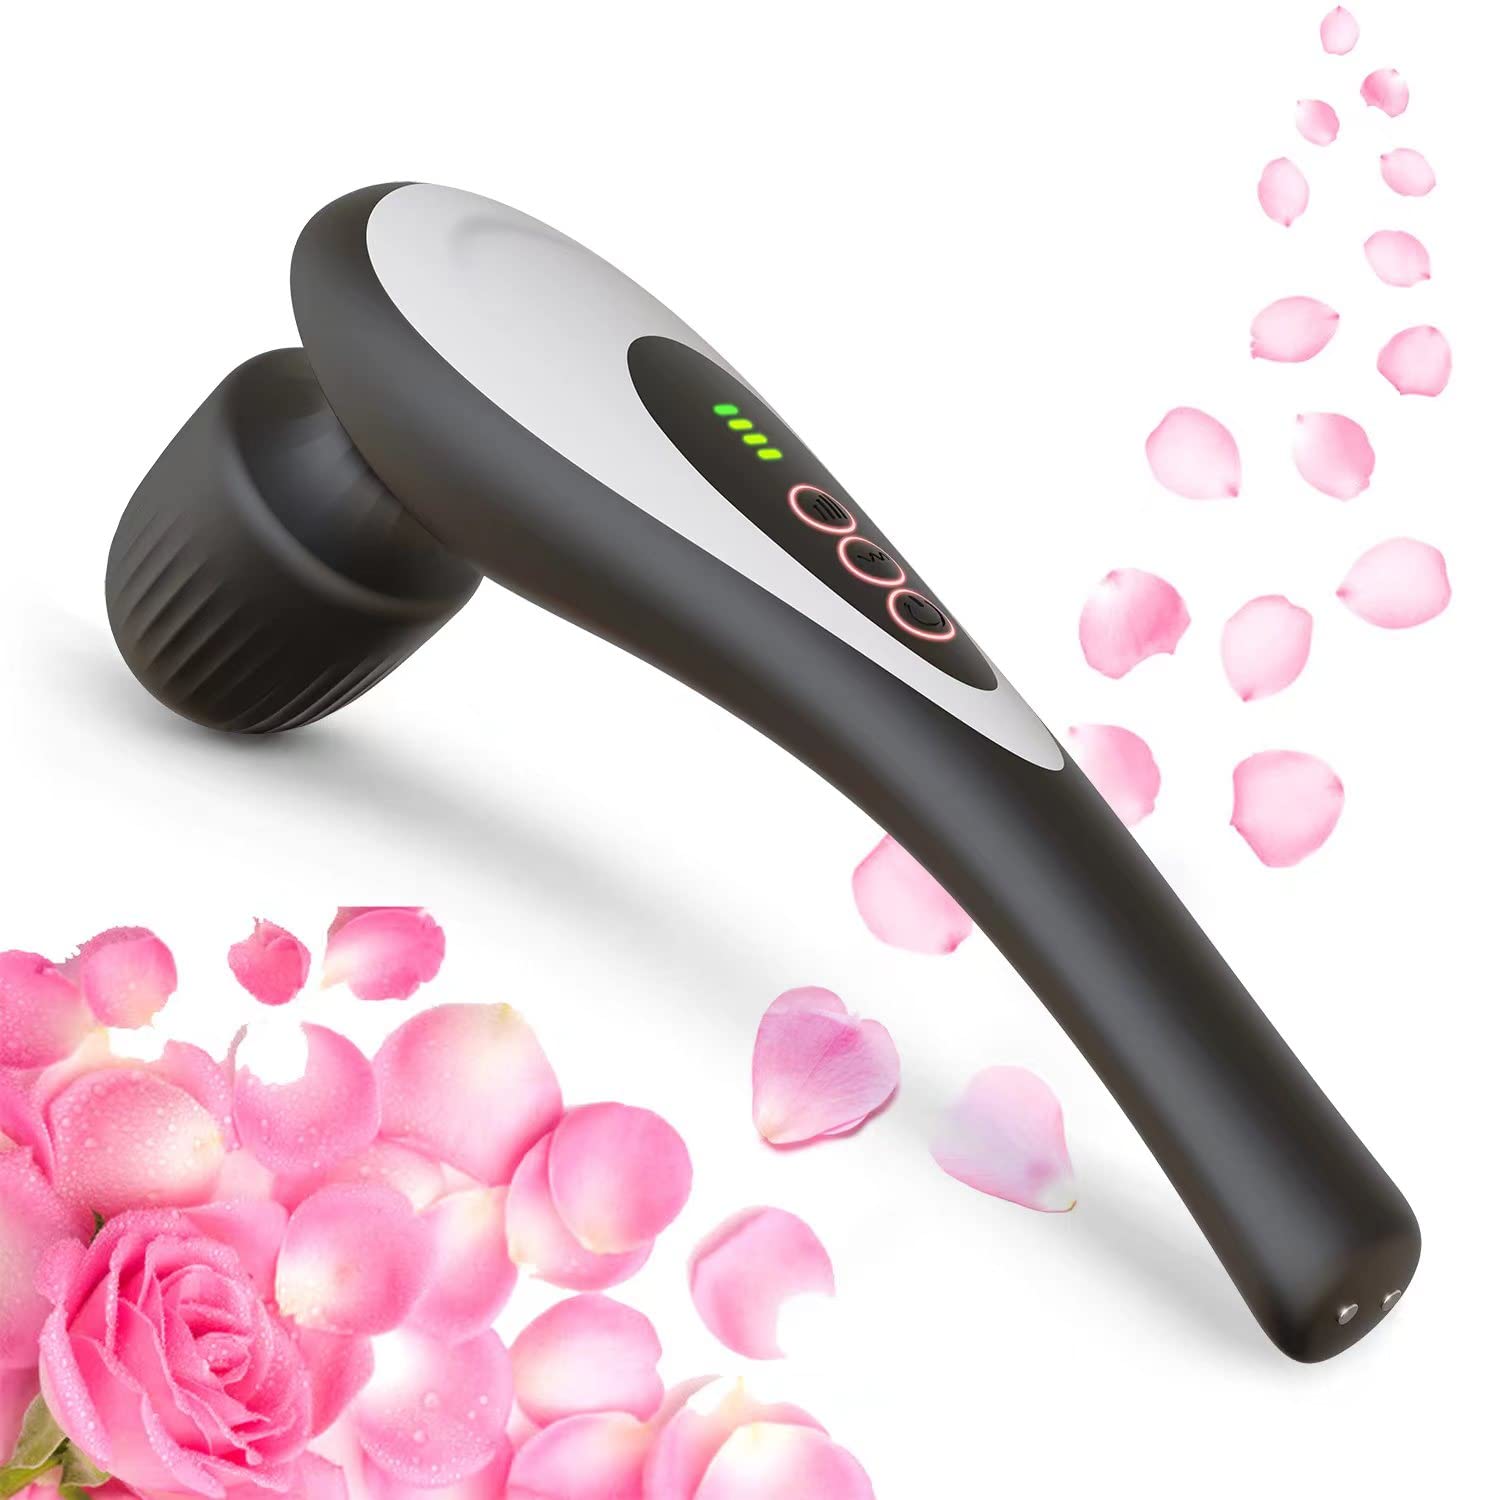 Roysmart Personal Handheld Vibrating Massager-Cordless Electric Handheld Percussion Muscle Massager, Deep Tissue Massager for Neck Back Shoulder Foot, Portable Seven Wand Massager for Full Body